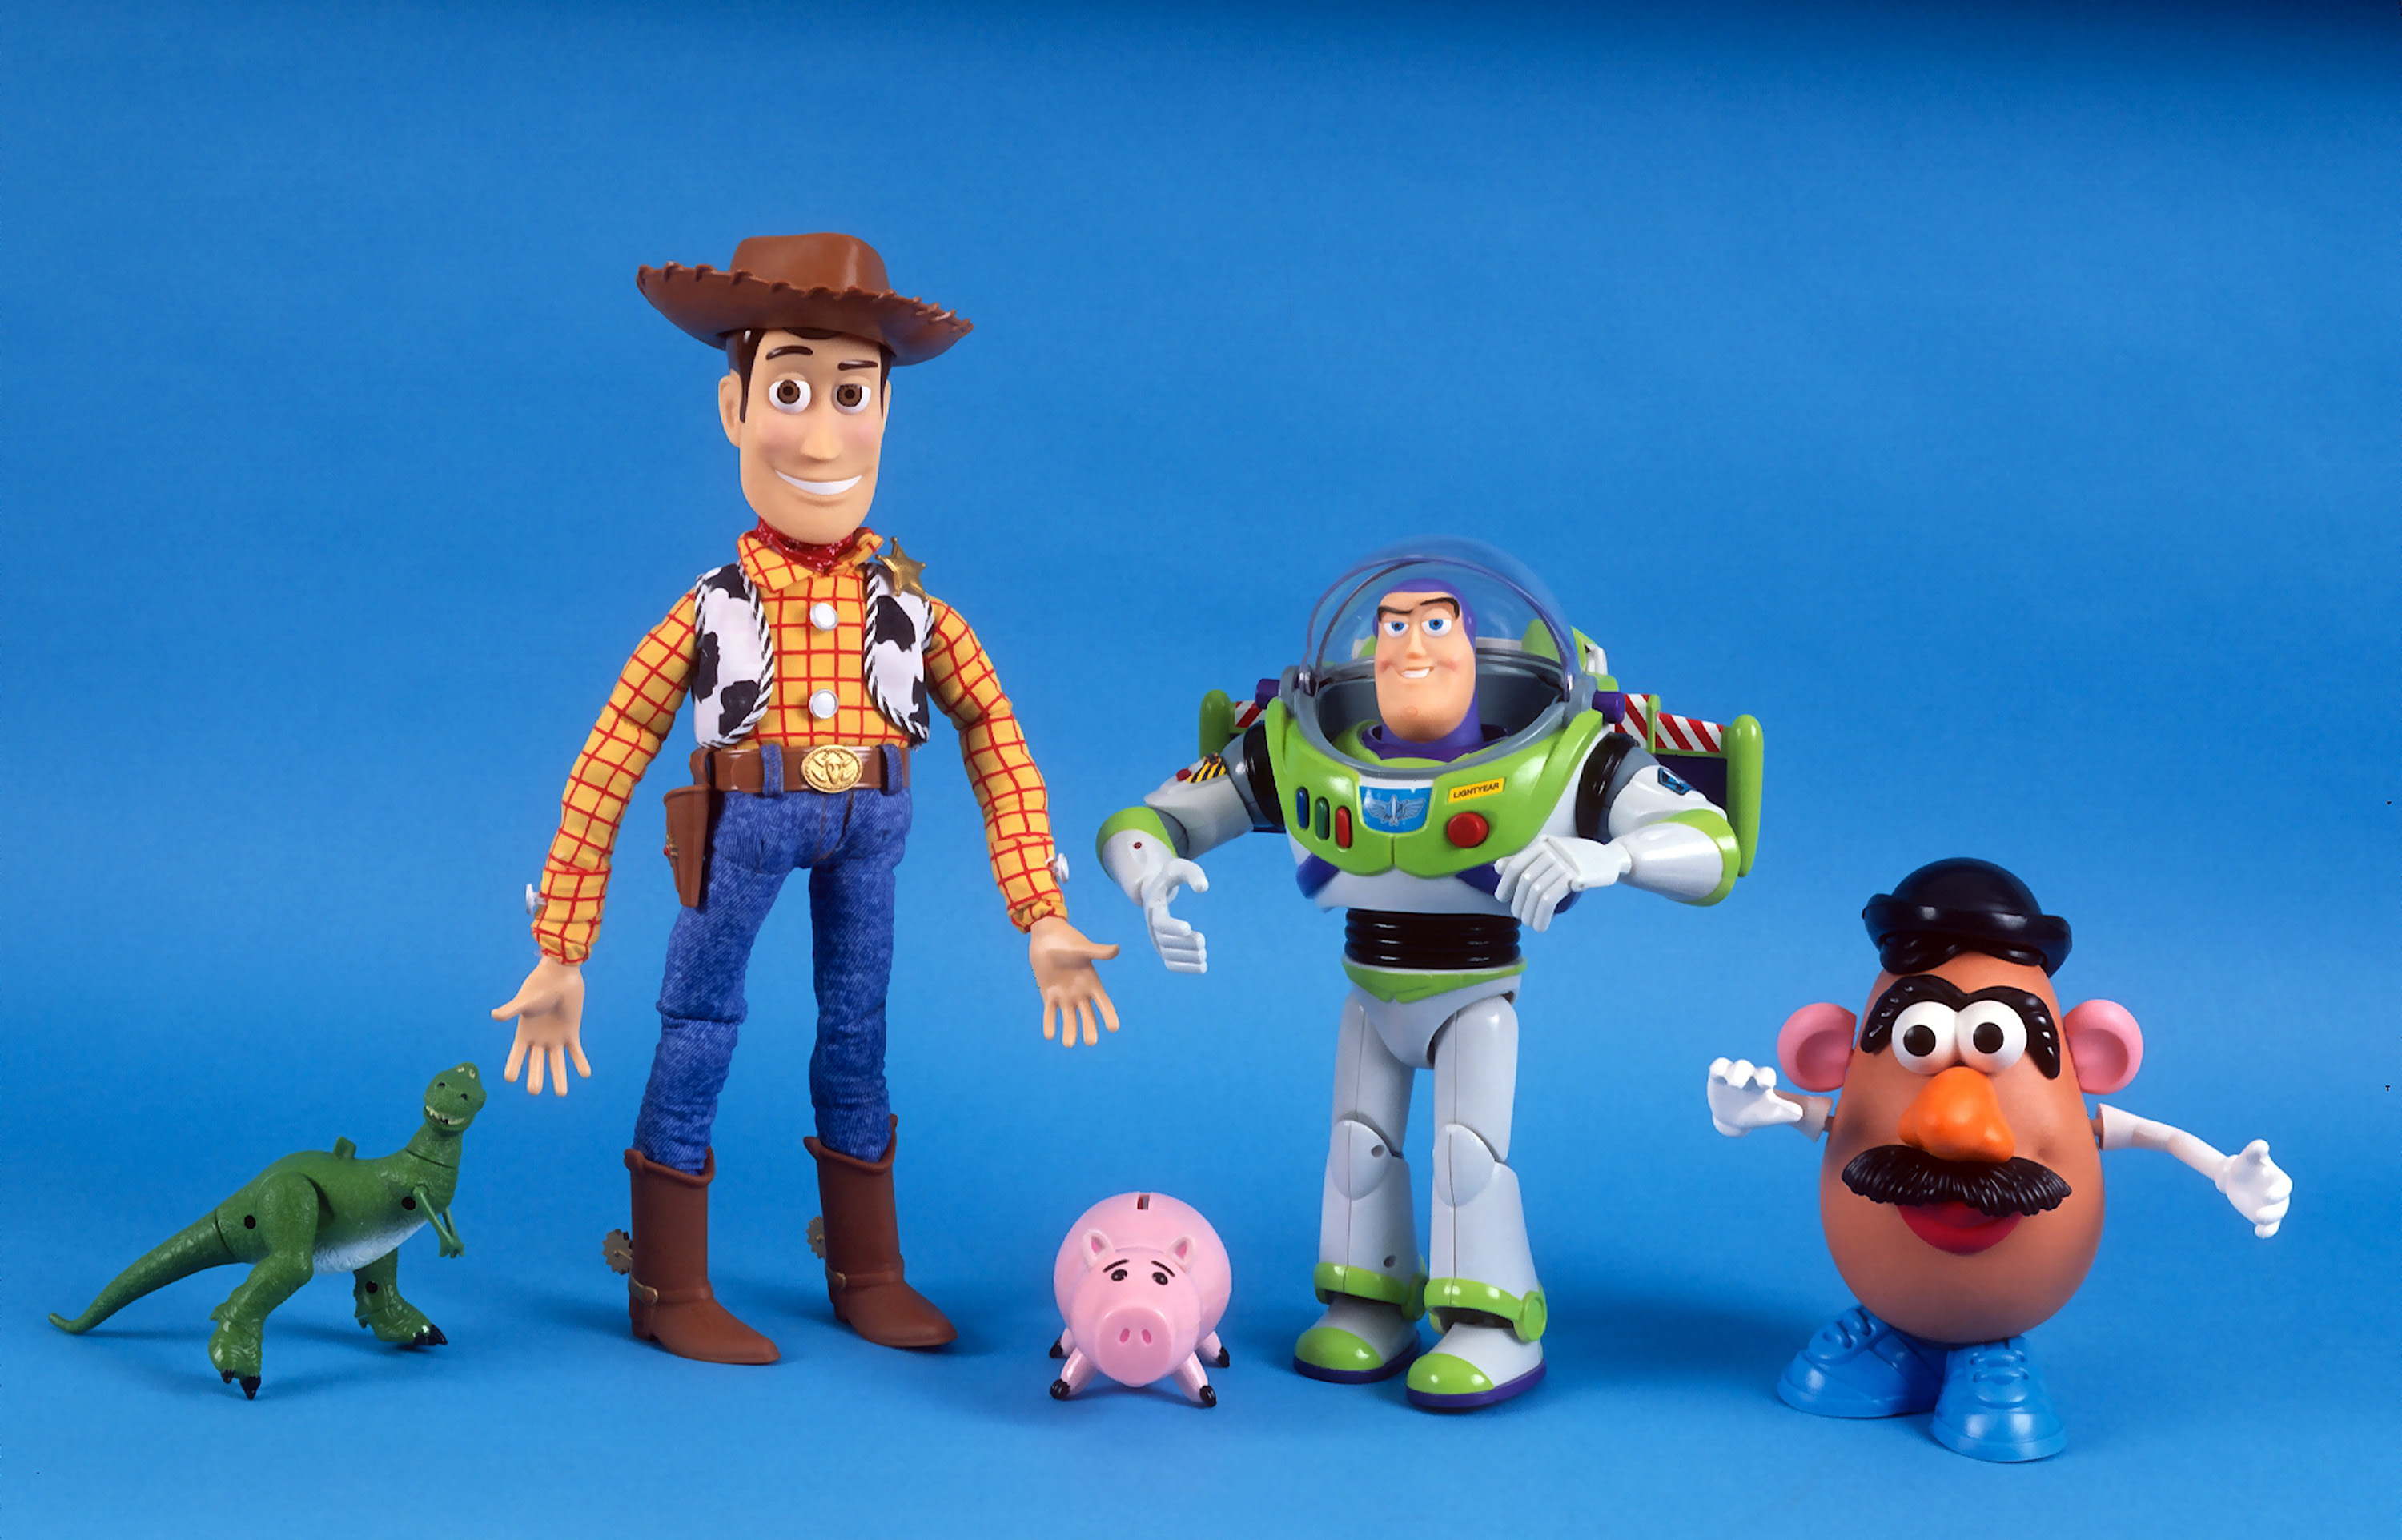 Details about   Disney Store 18" Woody Plush Toy Story 4 Bonnie Written on the Boot Cowboy NEW 